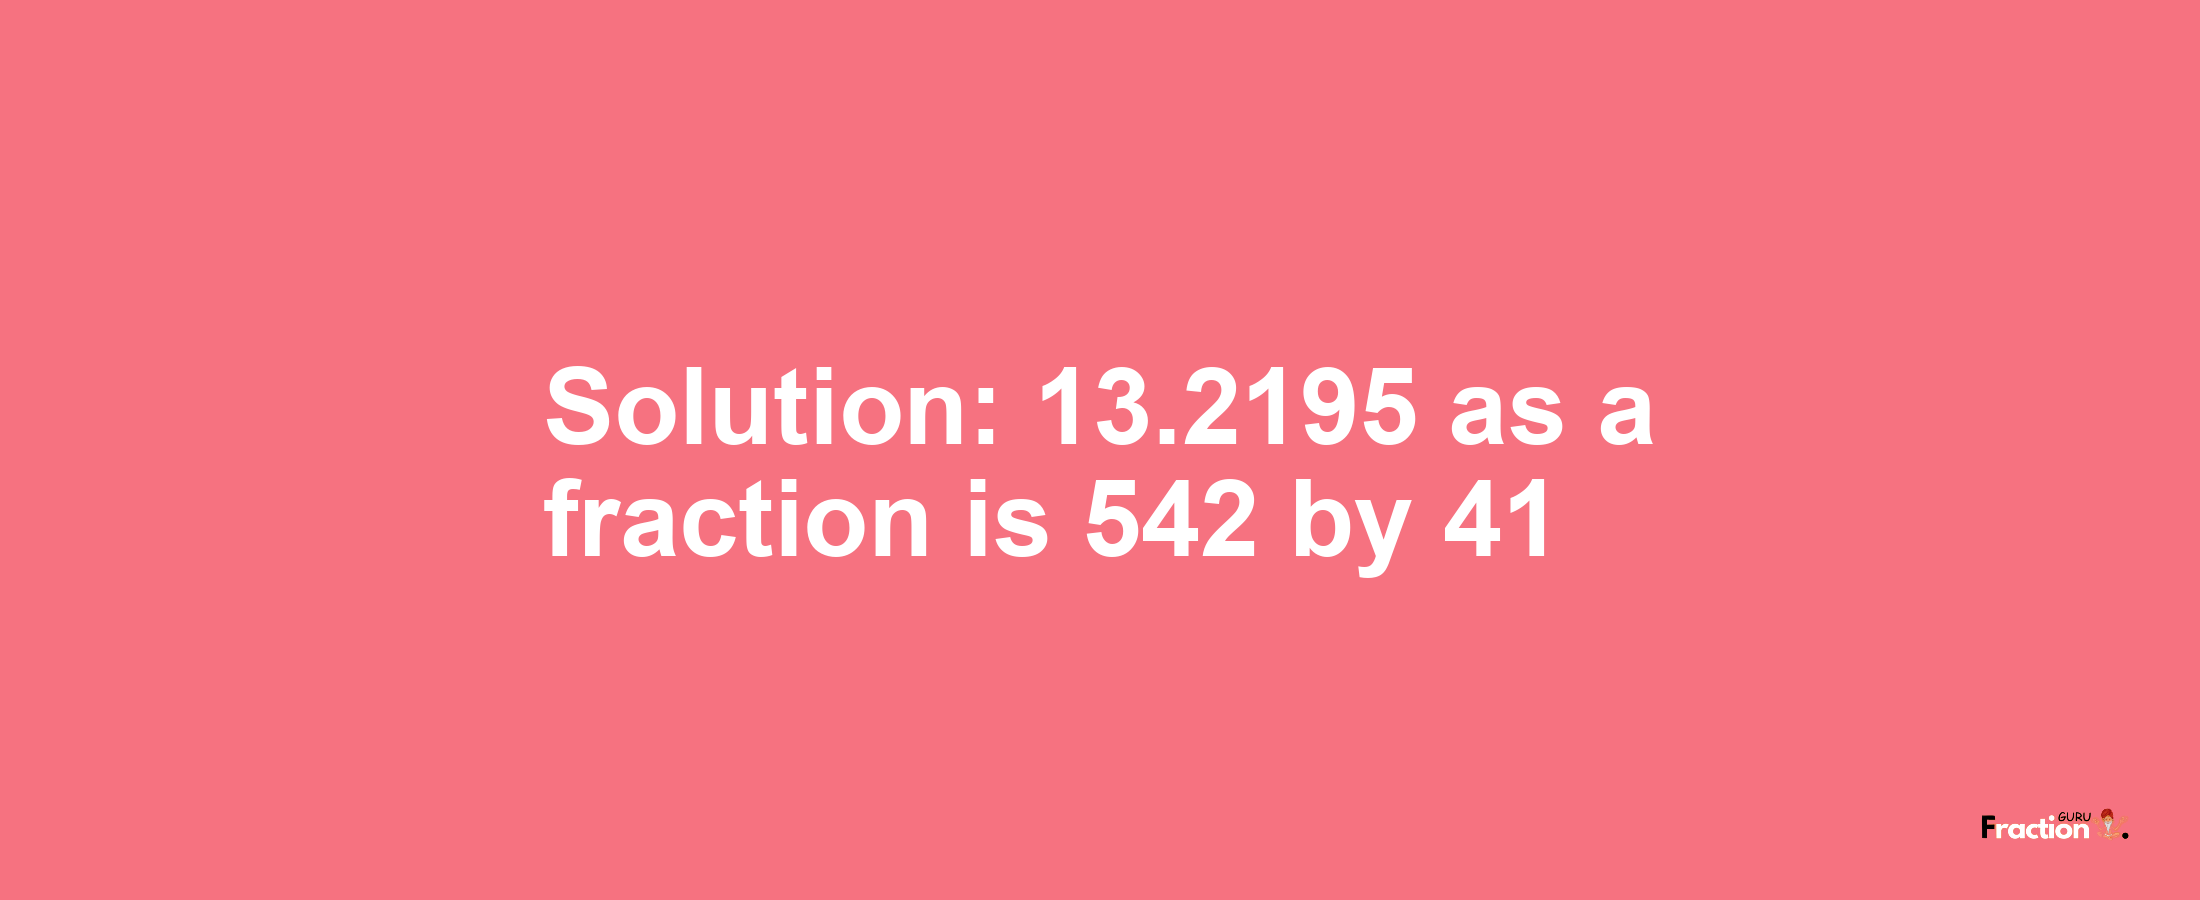 Solution:13.2195 as a fraction is 542/41